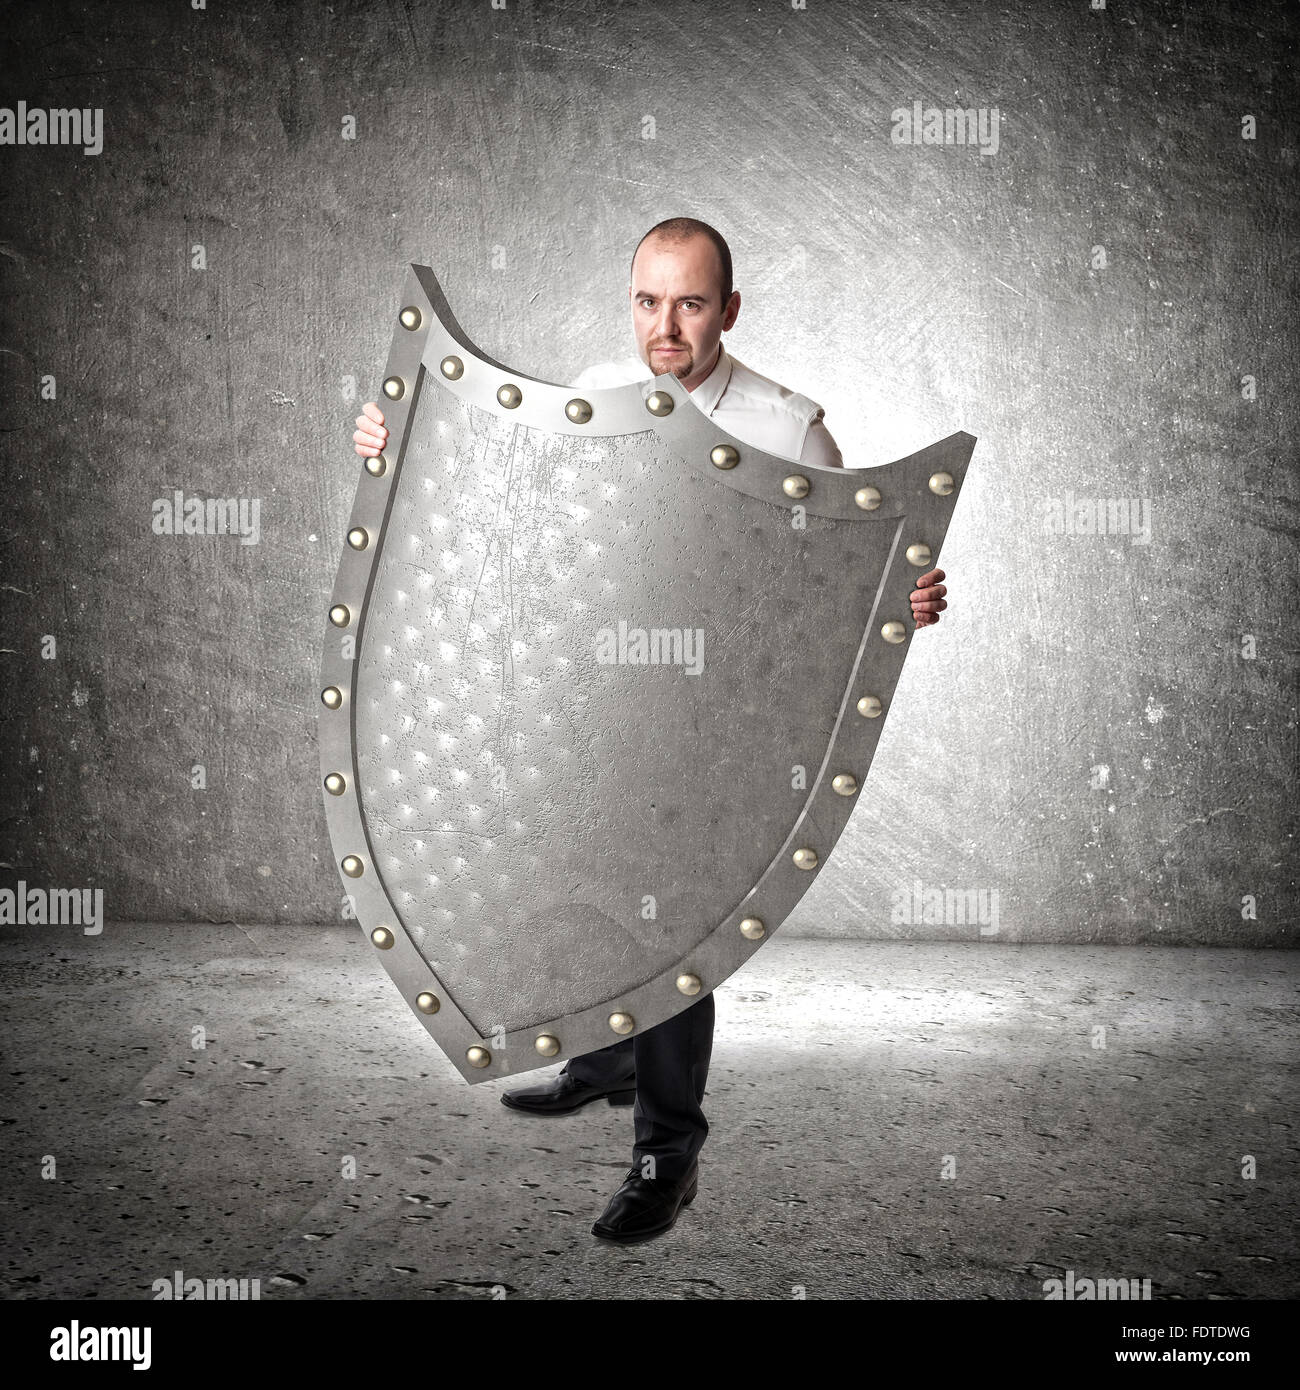 3d metal shield abstract background and businessman Stock Photo